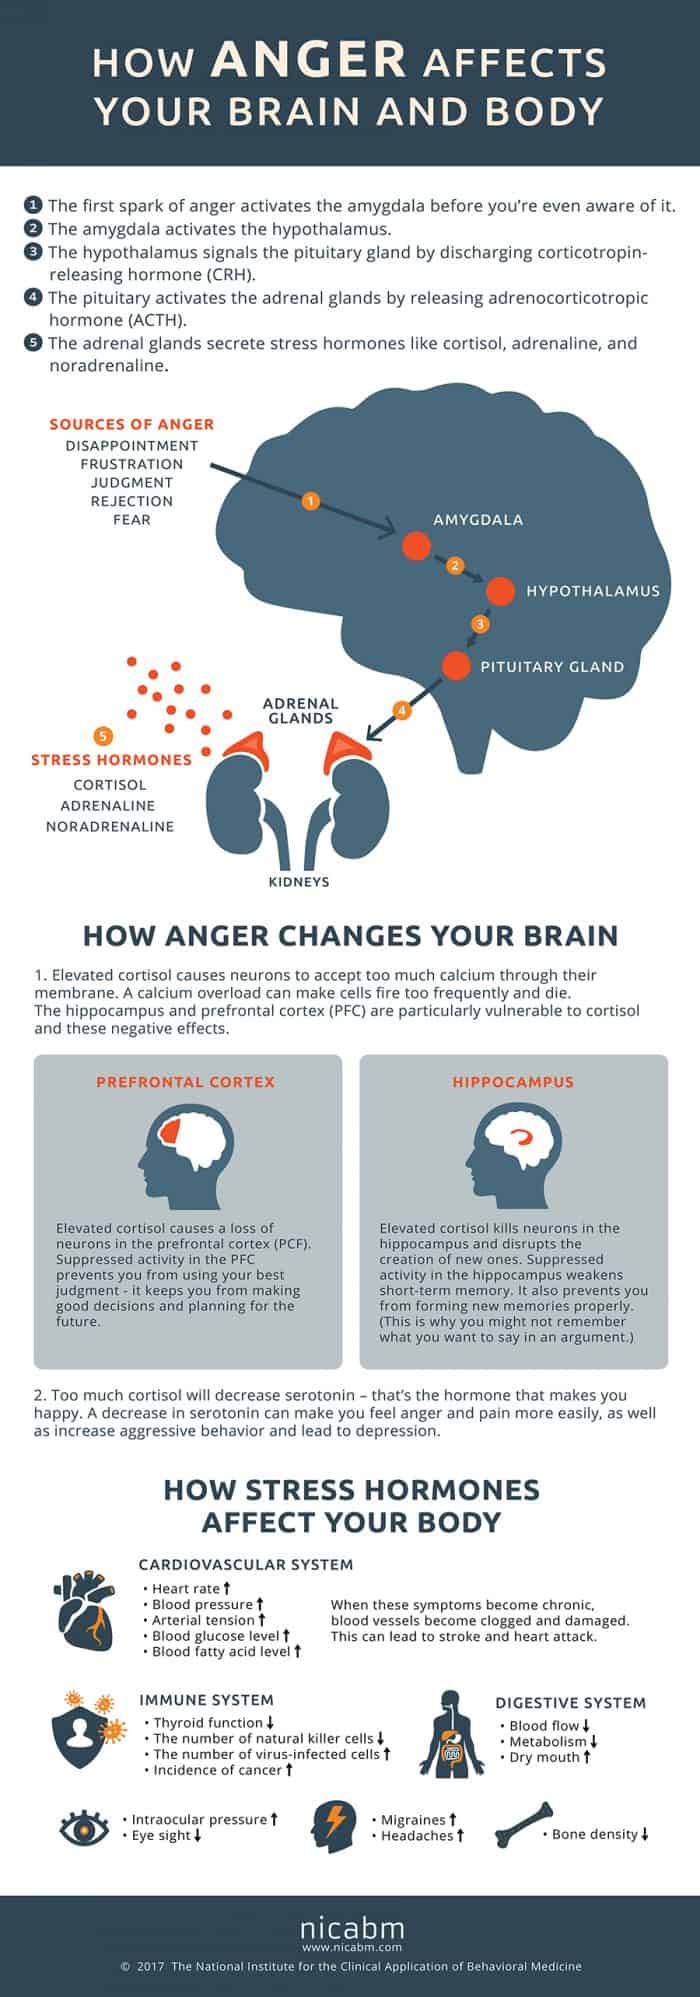 an infographic depicting the potential effects of anger on the brain and body